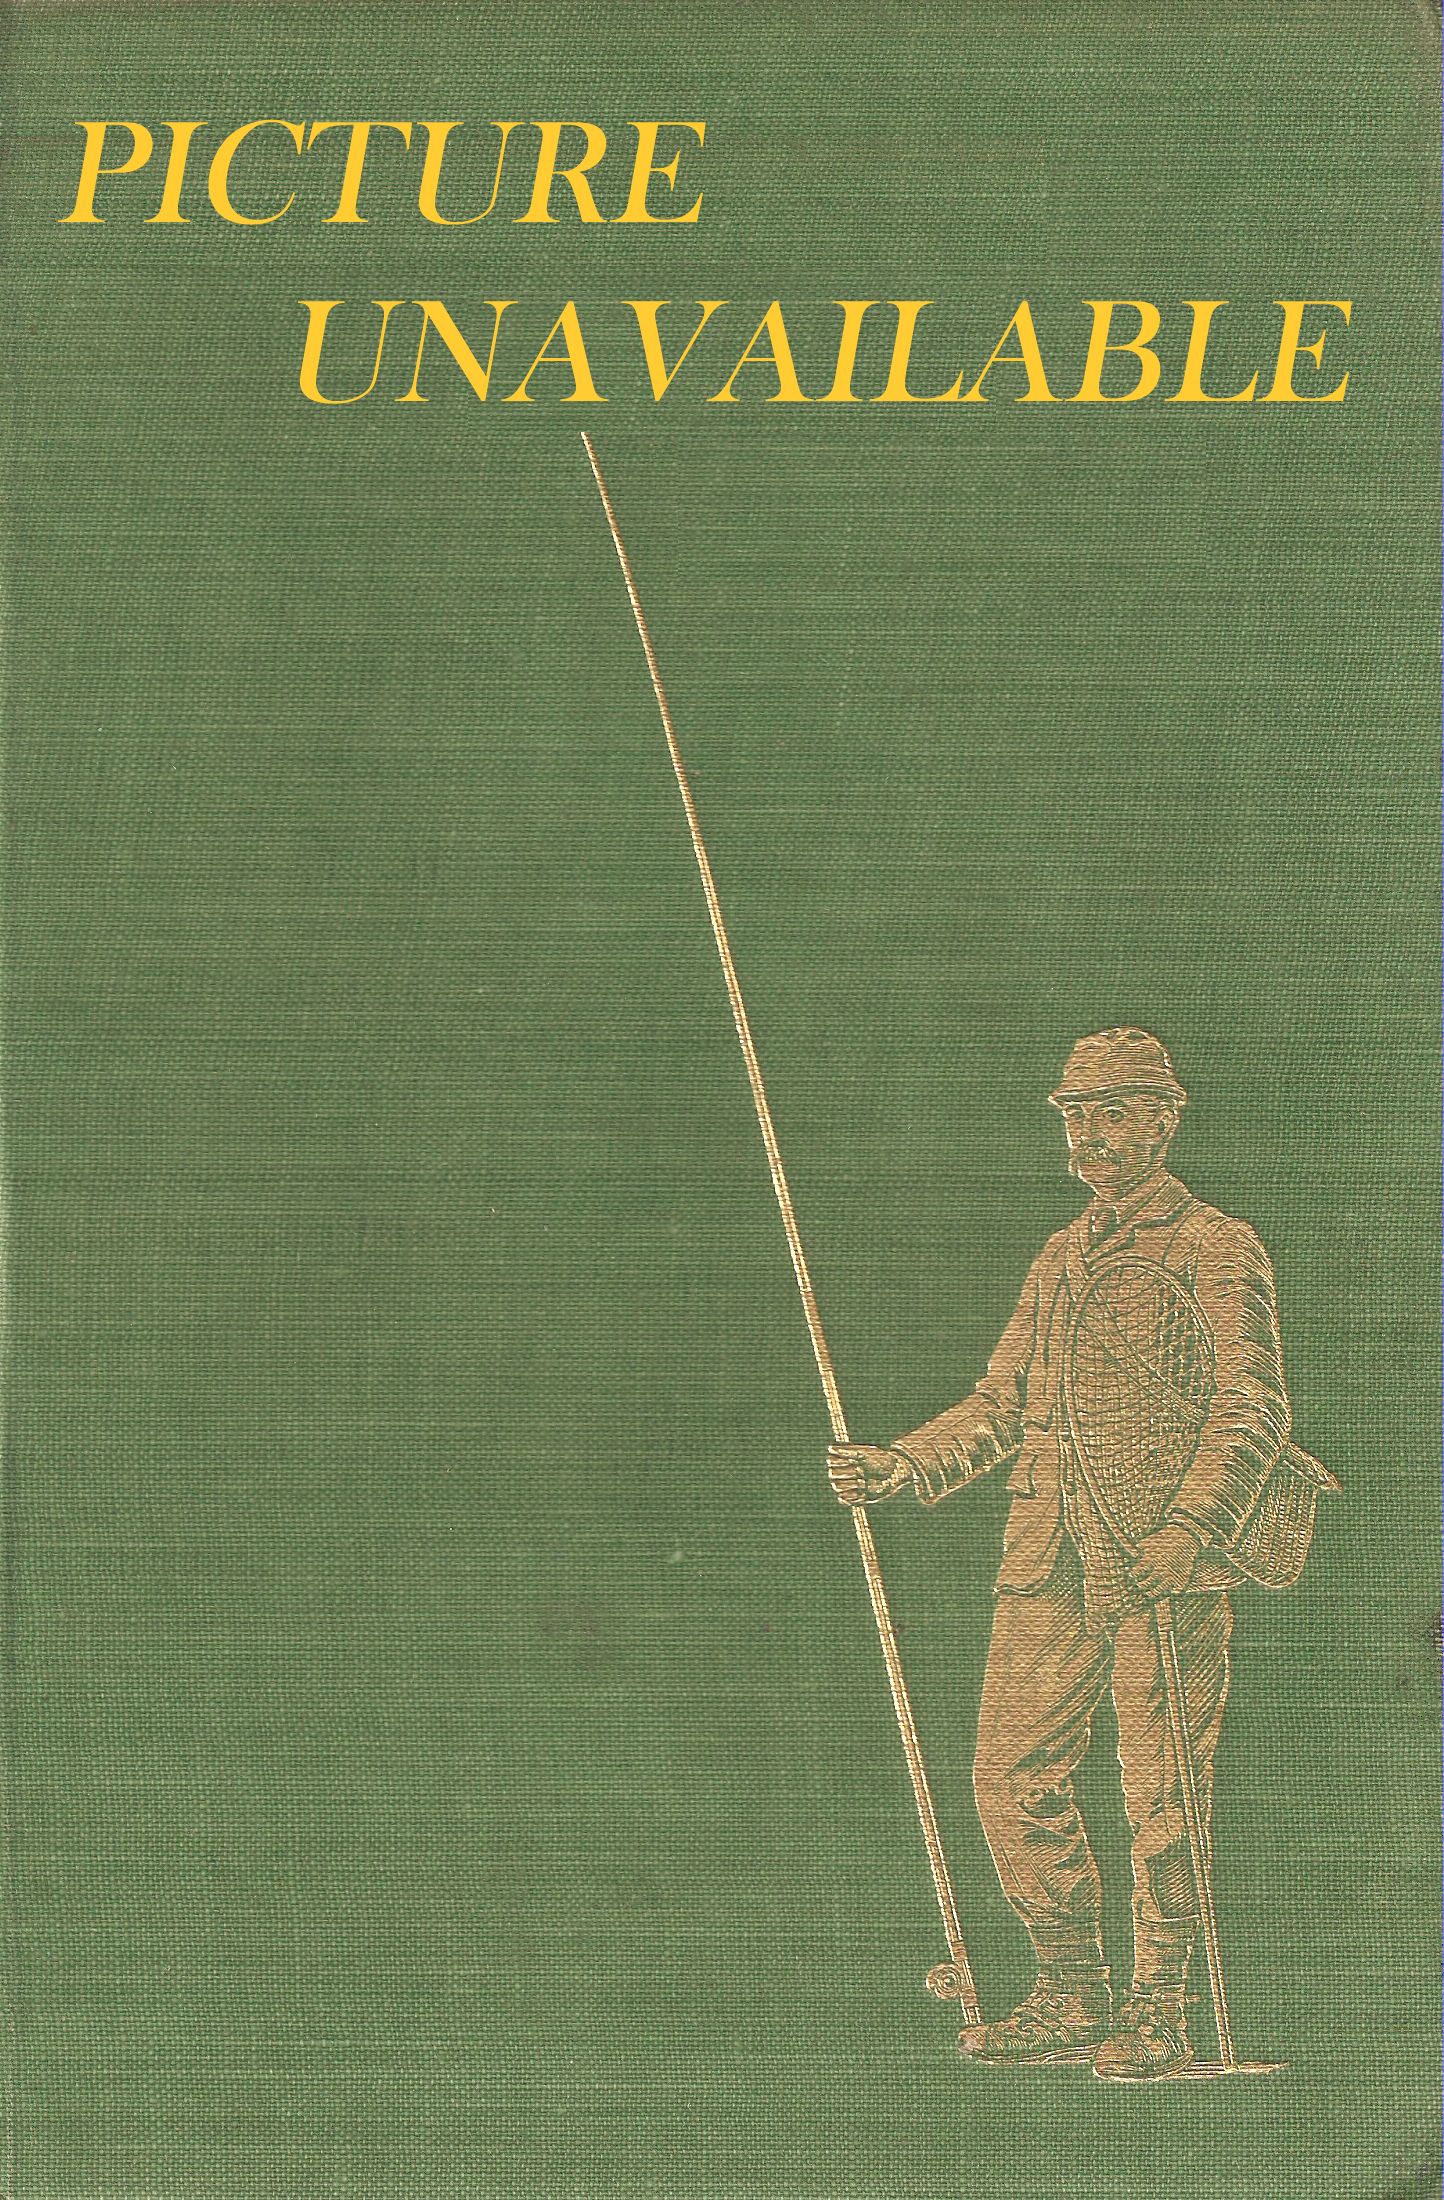 THE DIARY AND OBSERVATIONS OF A TENCH FISHER. By D.R. Wakefield.